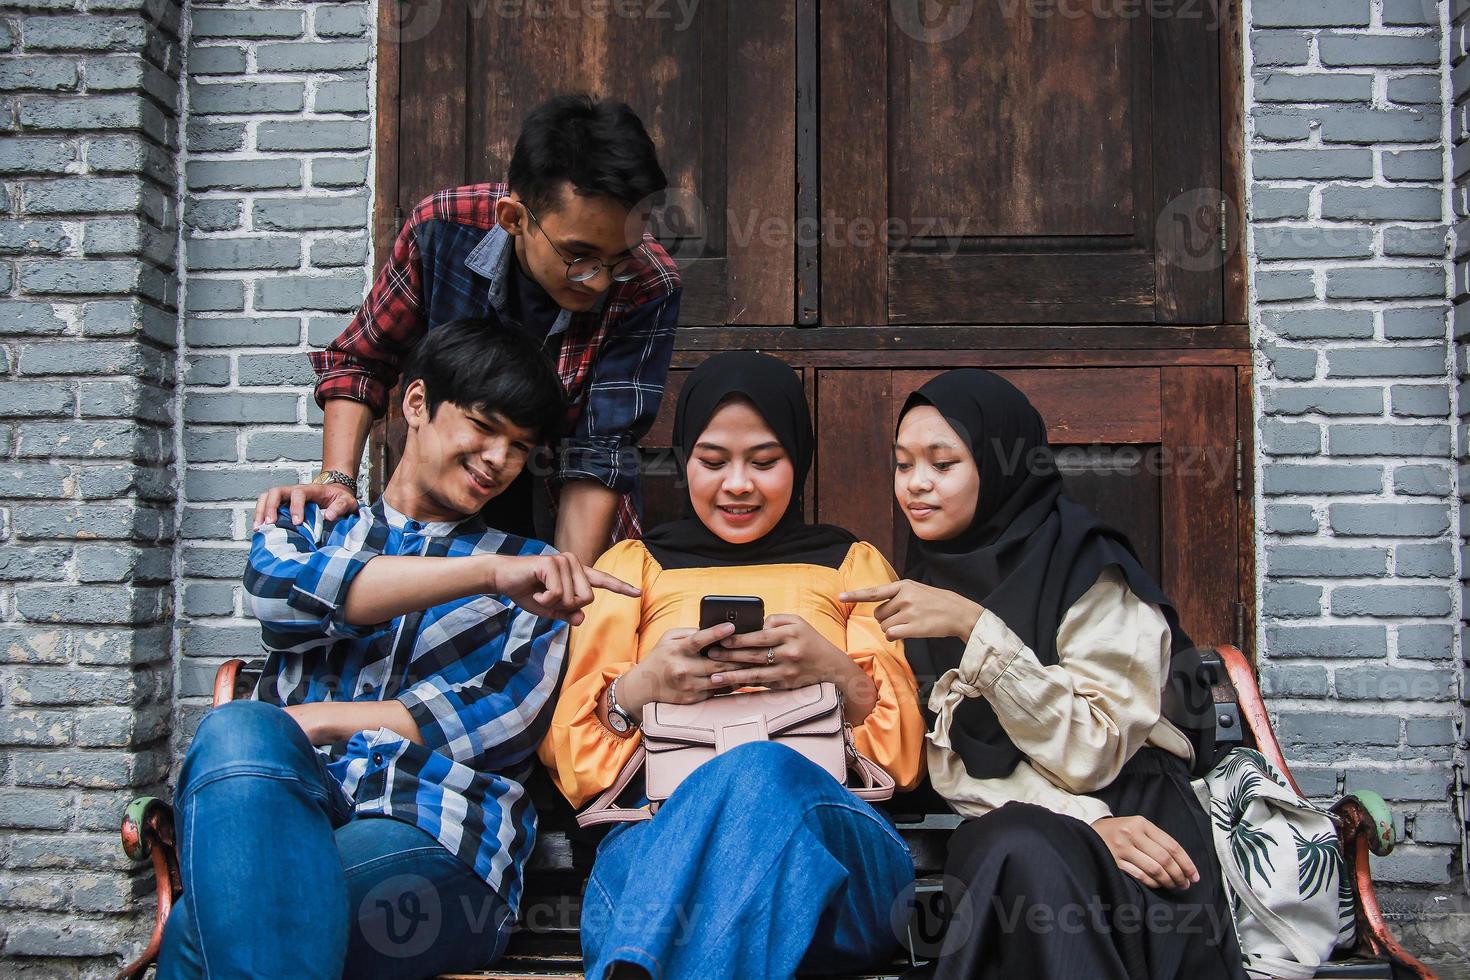 Four young friends sitting outdoors and looking at mobile phone. Group of people sitting on a bench and watching video smiling and having fun together photo